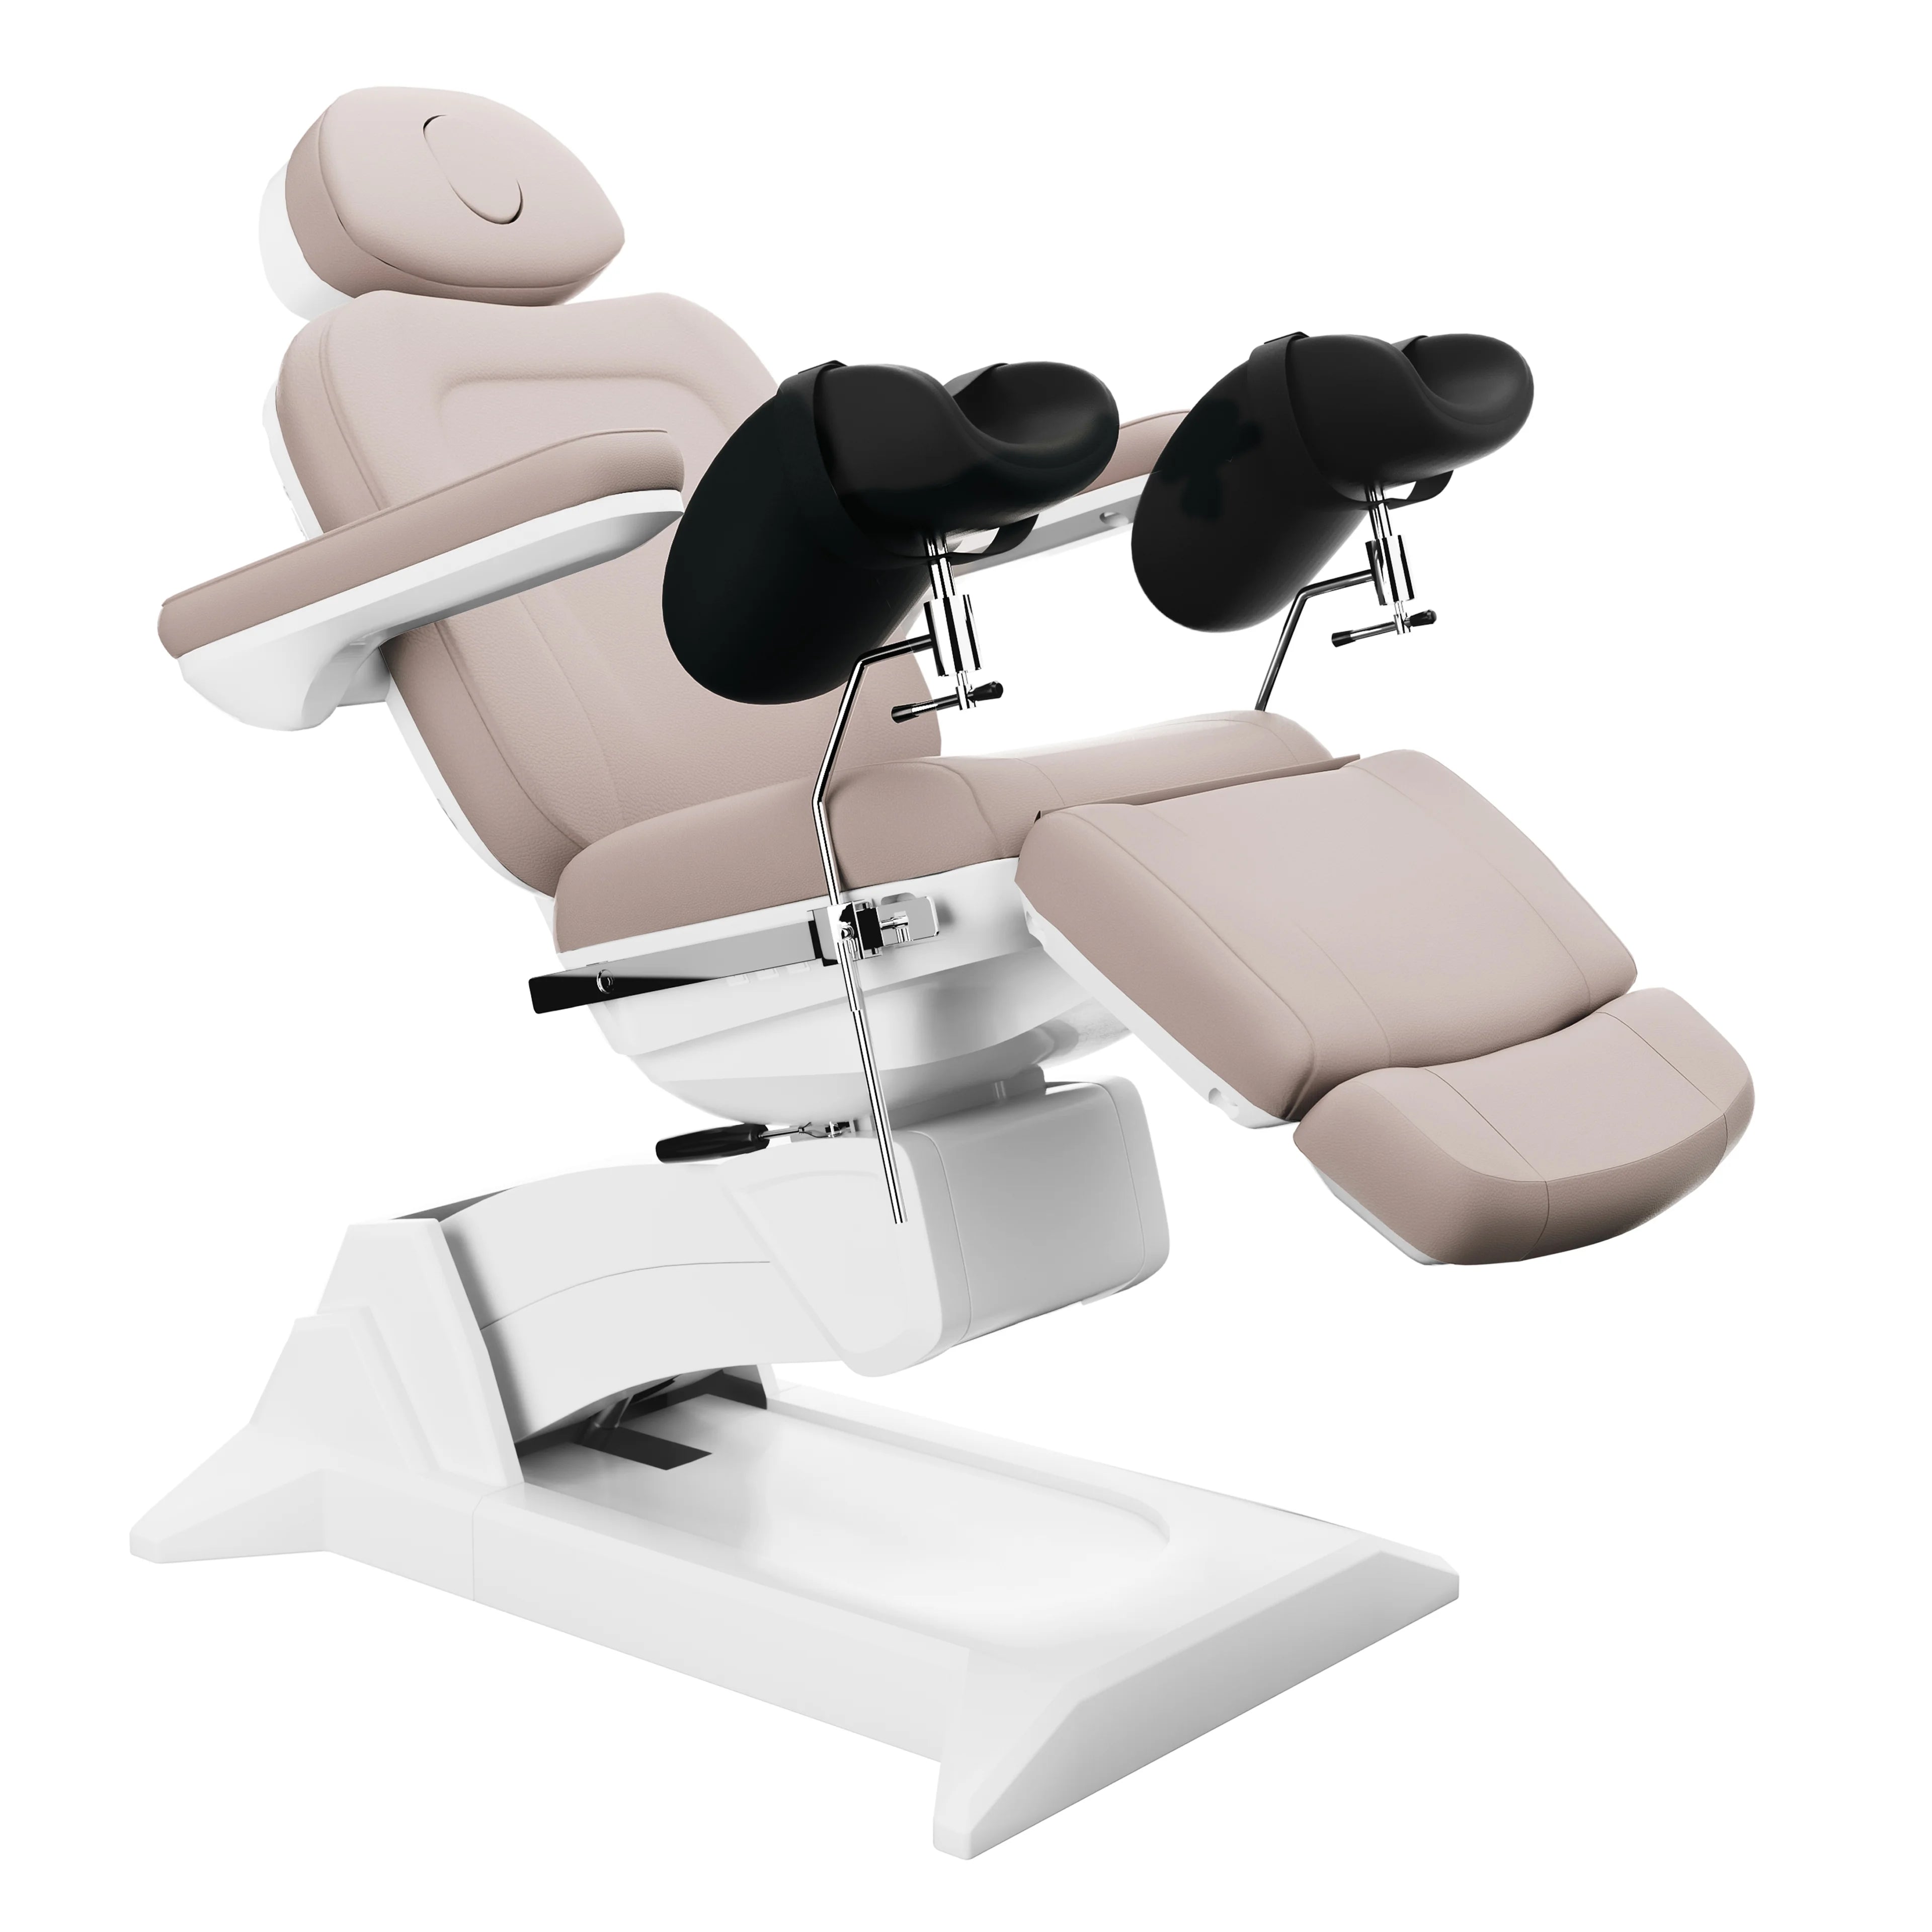 SpaMarc . Ultera (Taupe) . OBGYN & Gynecology . Rotating . 4 Motor Spa Treatment Chair/Bed